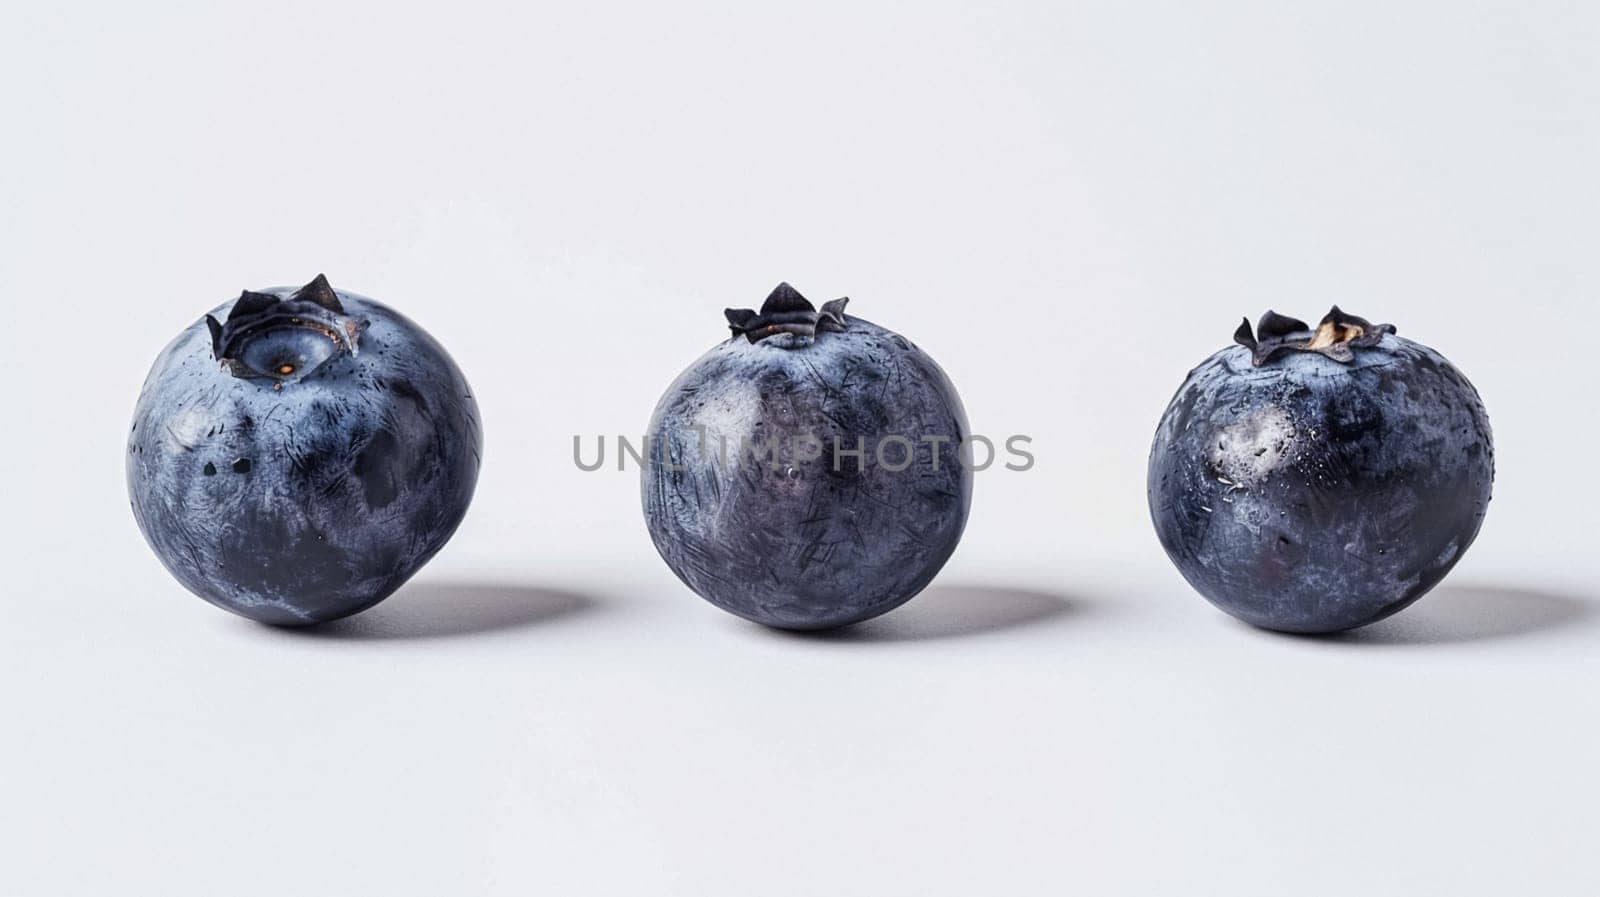 Beautiful blueberries isolated on white background, fresh blueberry farm market product by Anneleven